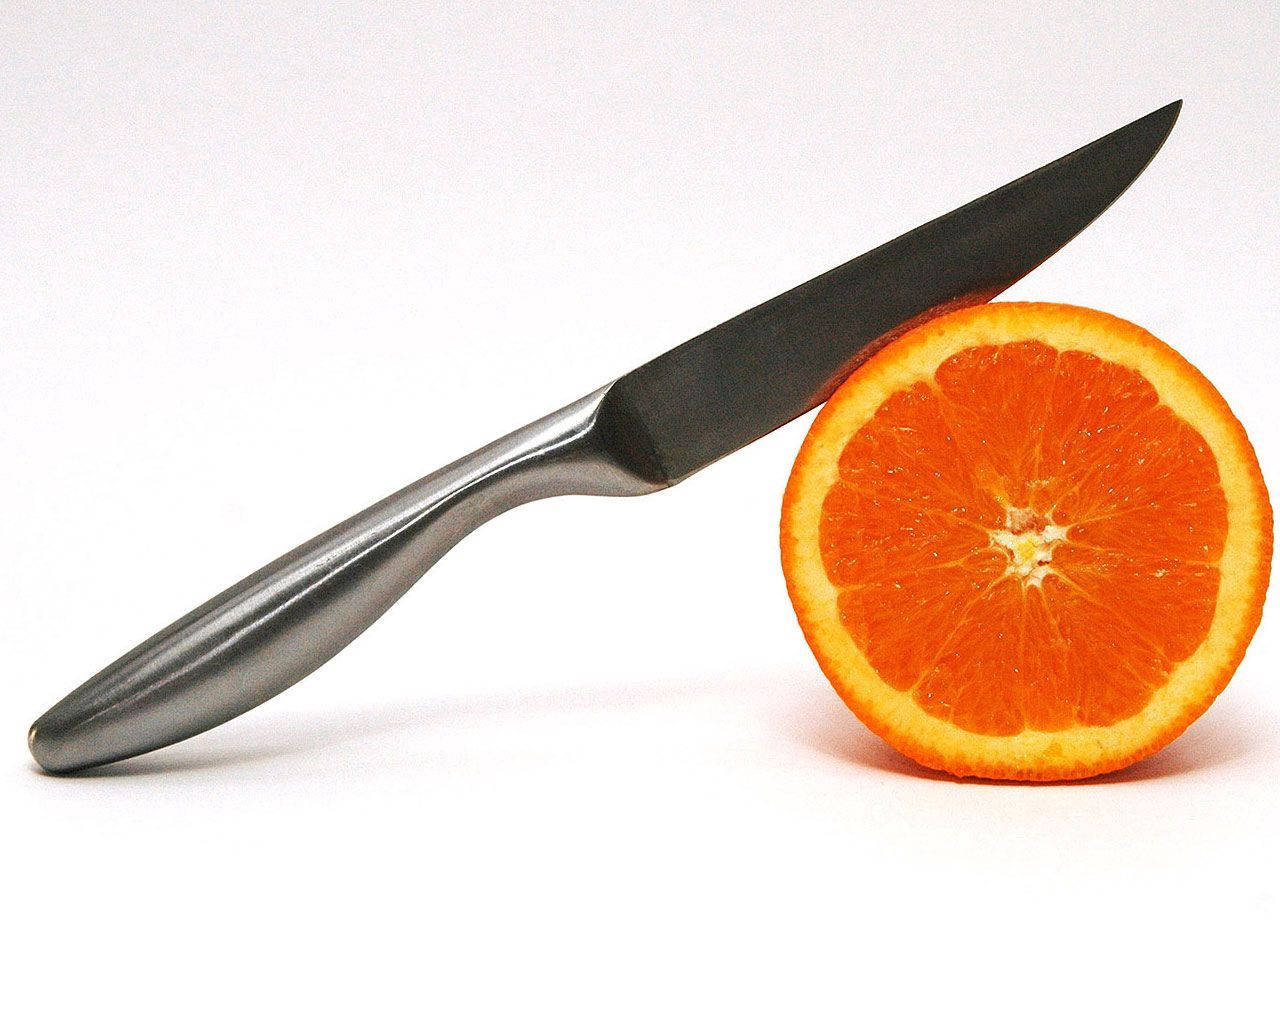 Cut Open, An Orange Provides A Refreshing Burst Of Natural Sweetness. Background